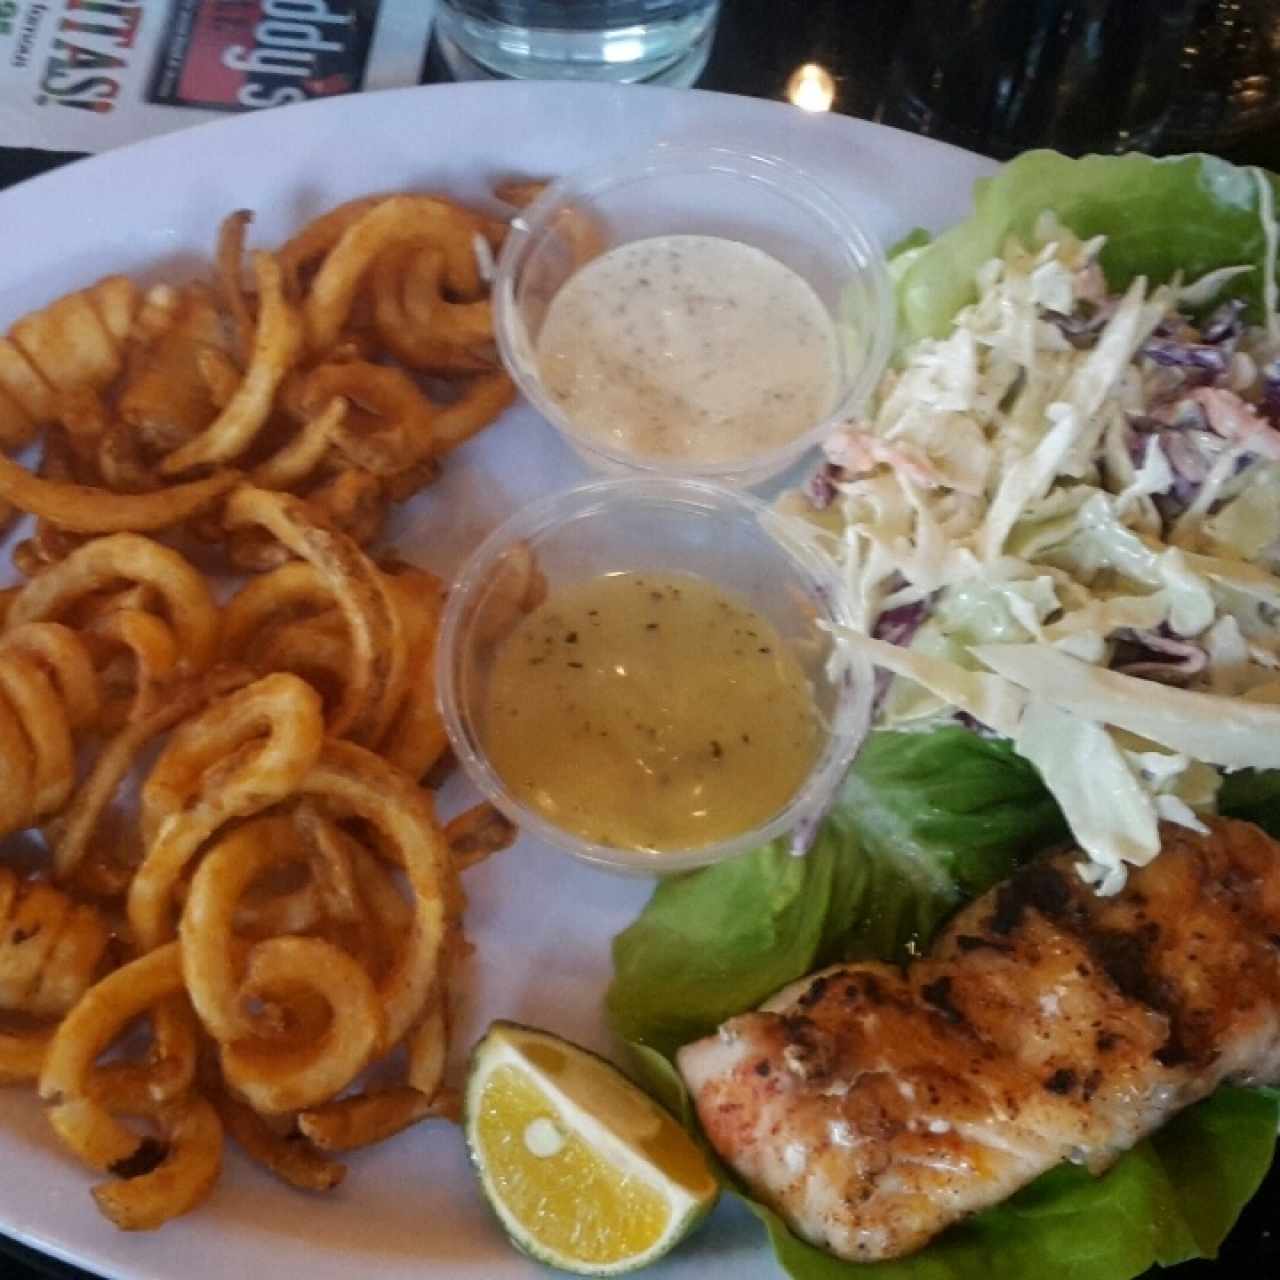 Red Snapper Fillet with curled french fries and Salad